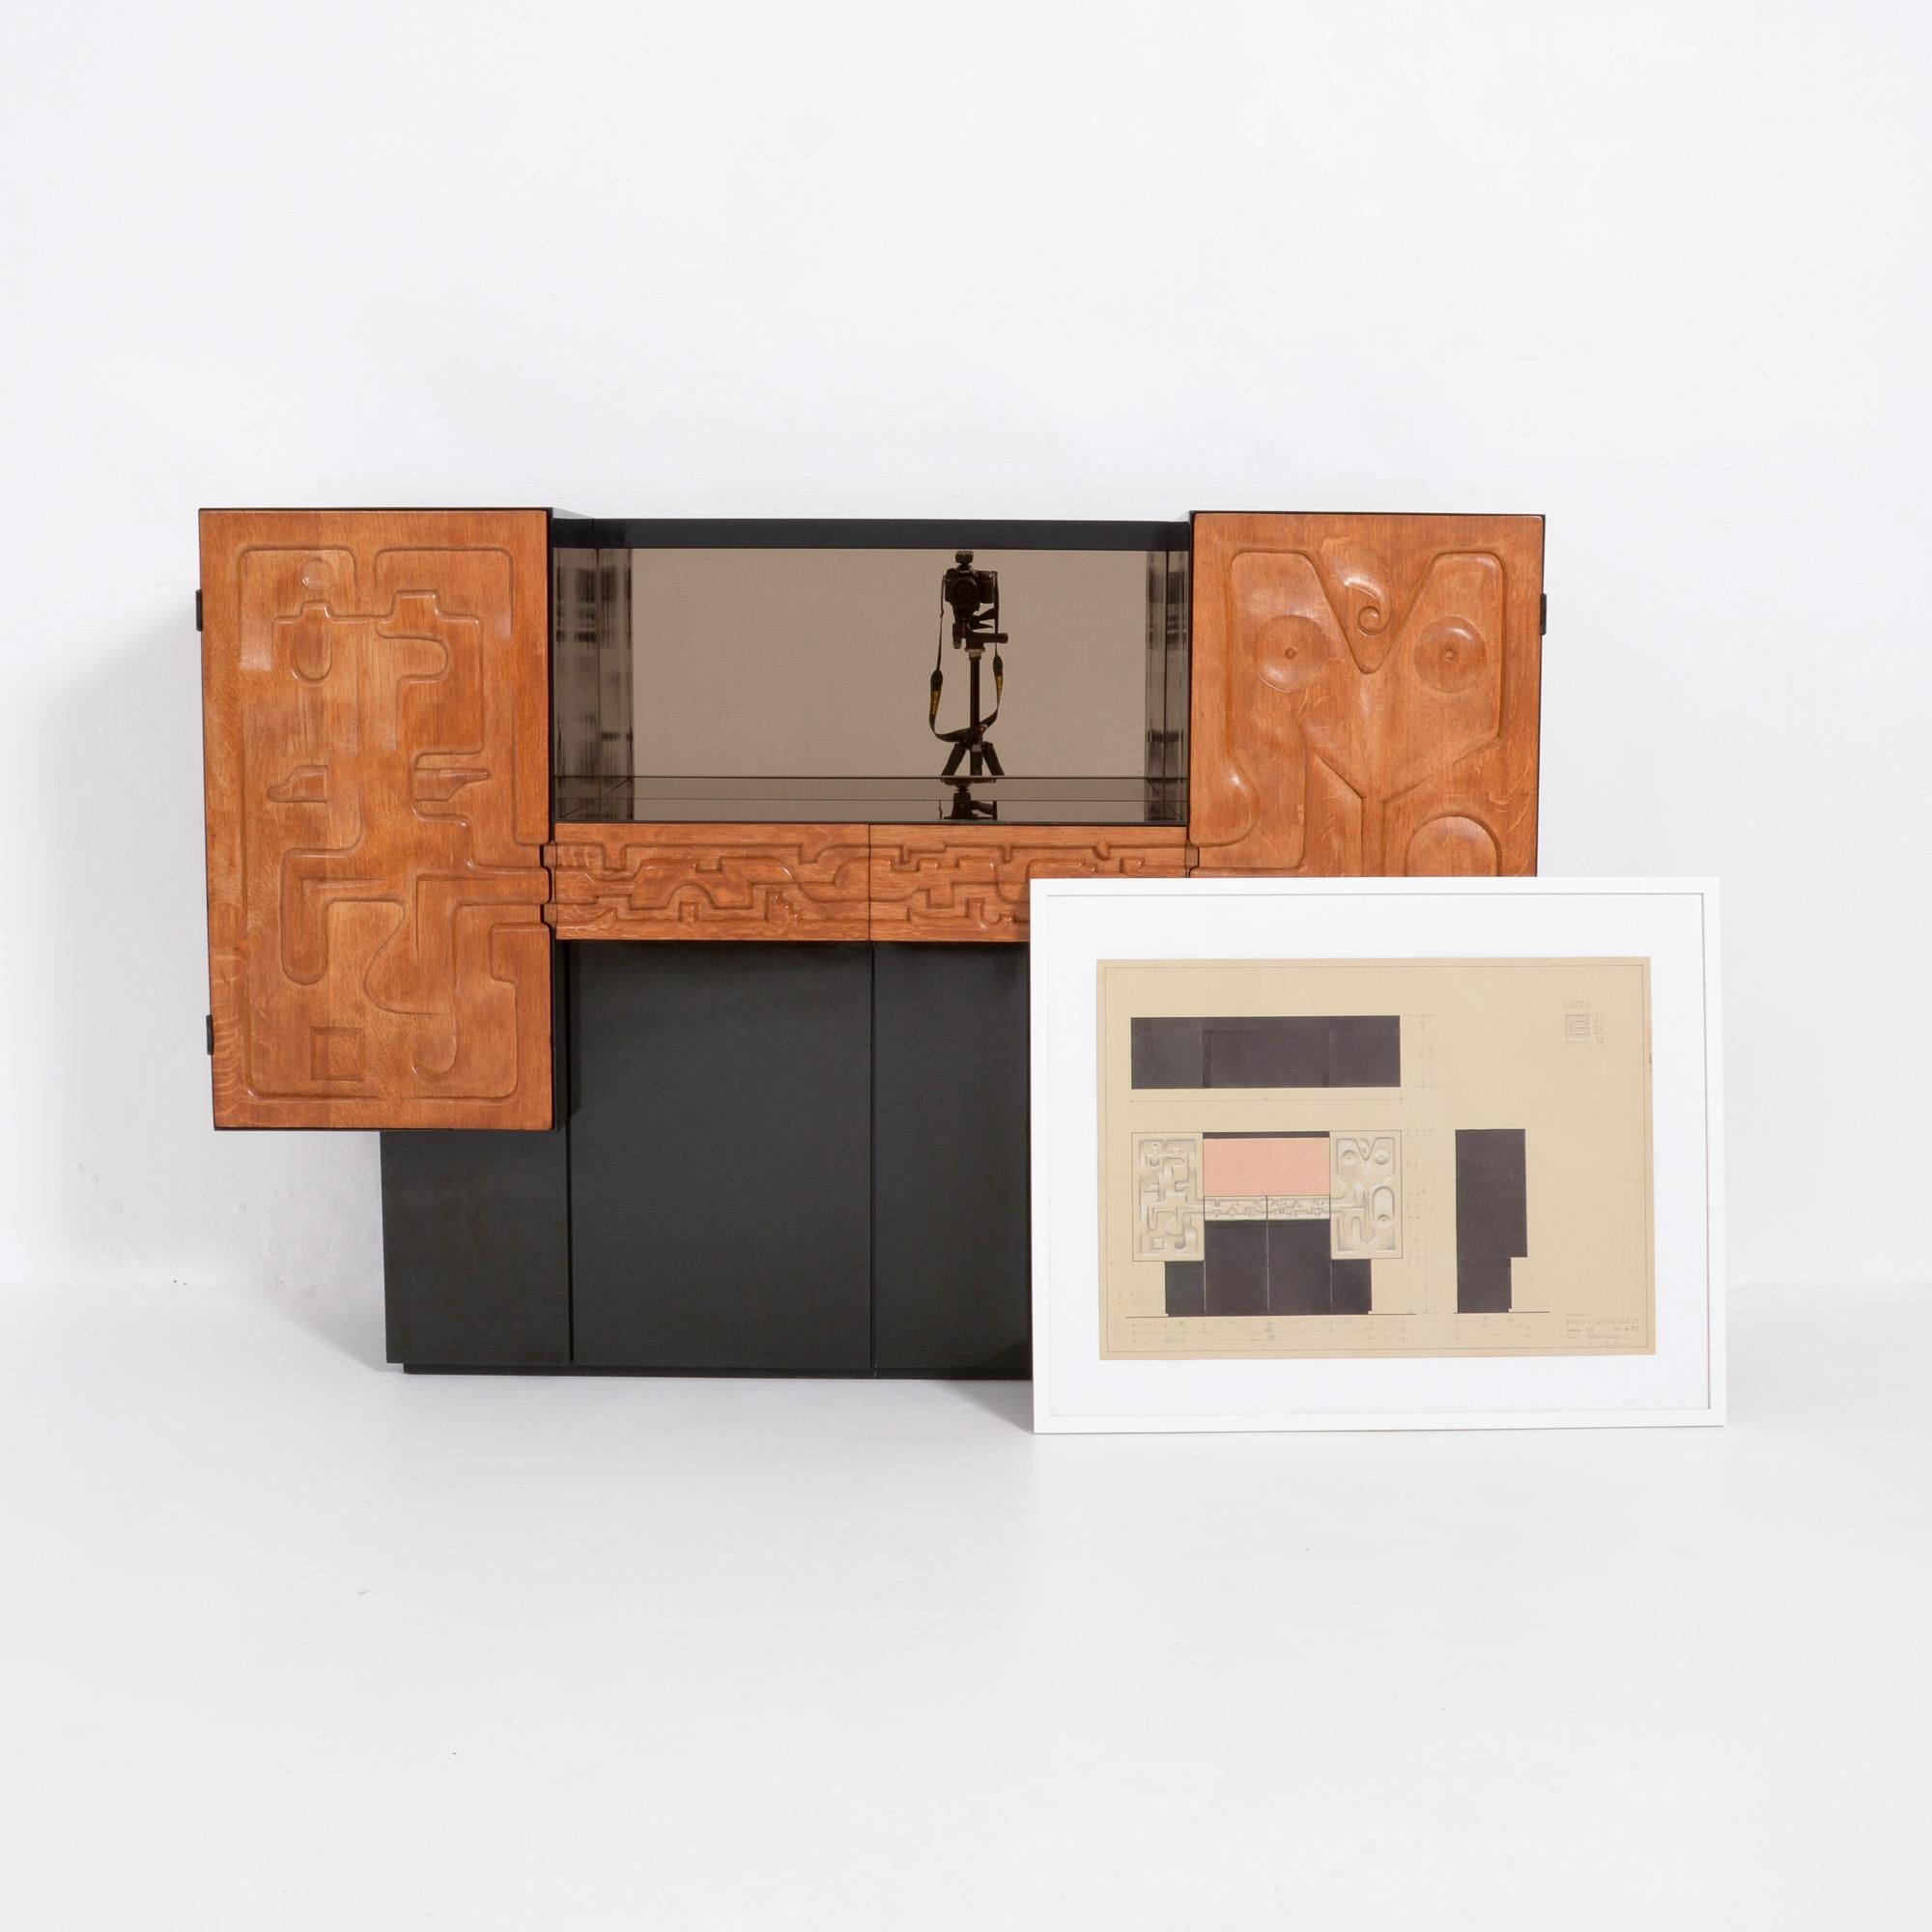 This bar cabinet was created by the Belgian furniture designer Paul Ghekiere in 1982.
We have the original detailed design drawing of the cabinet, signed and dated.
This one-off piece of furniture was handmade. The doors and drawers are sculpted